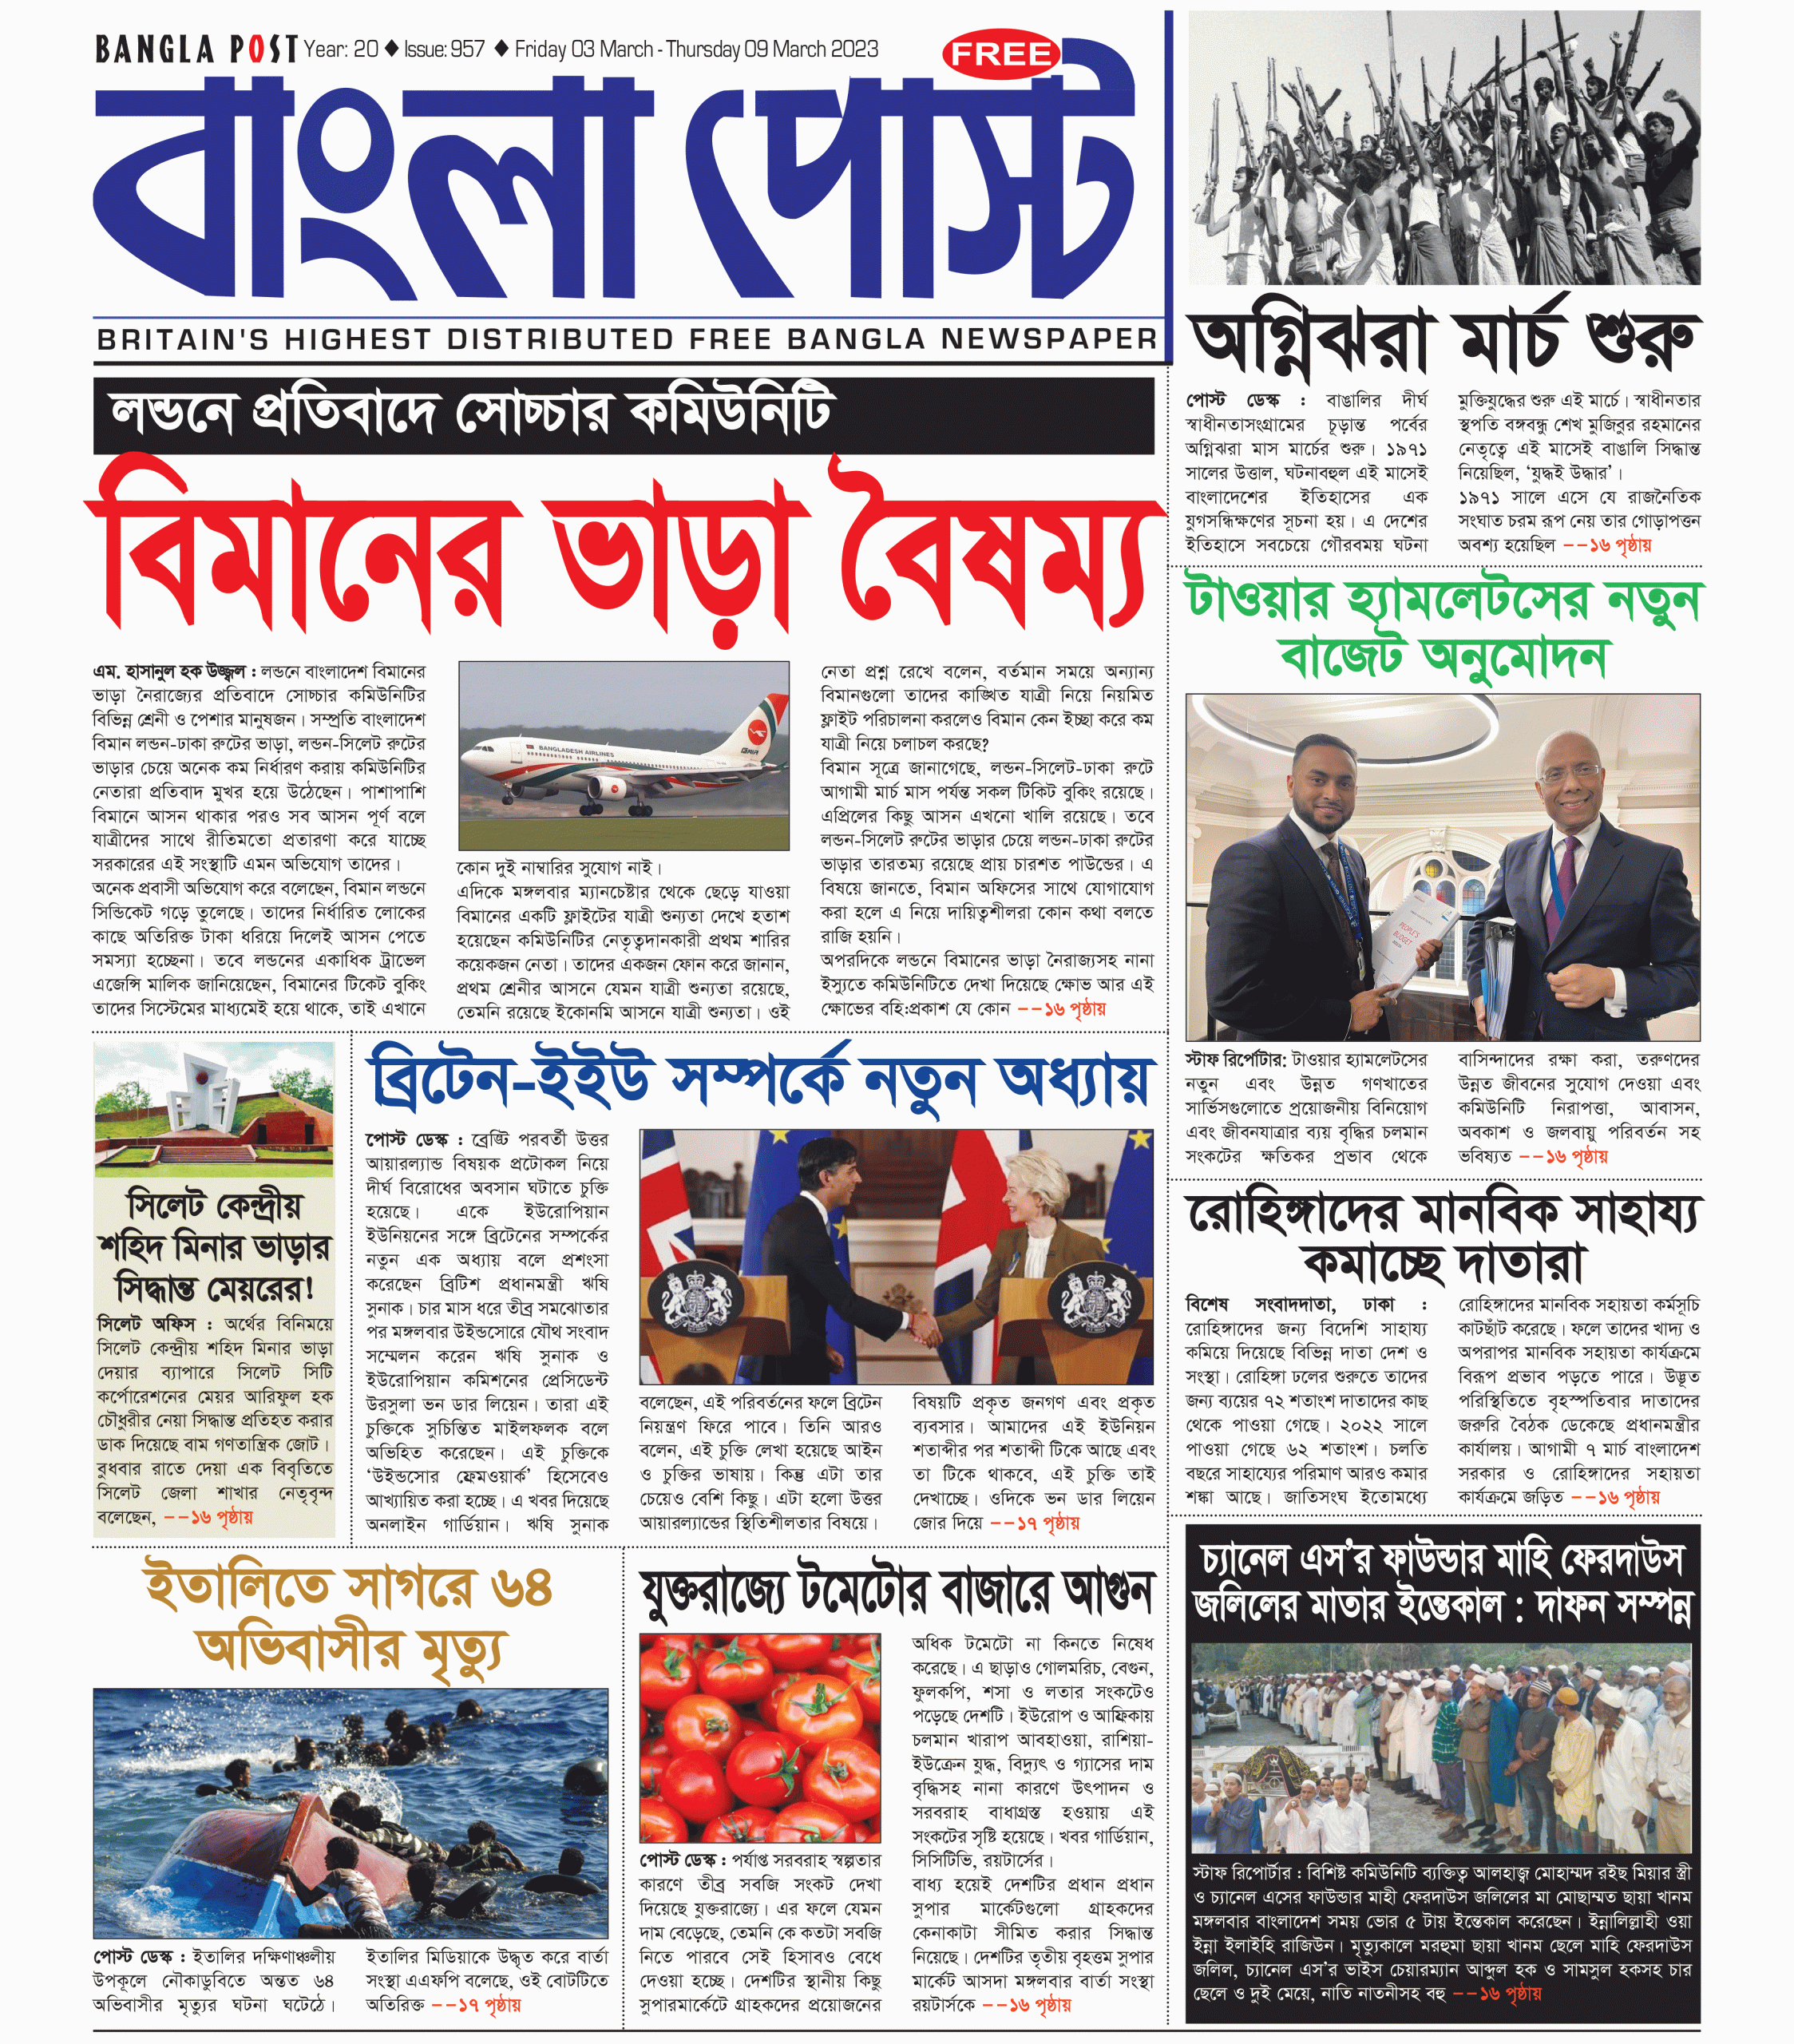 Bangla Post Issue – 957 | 03 March 2023